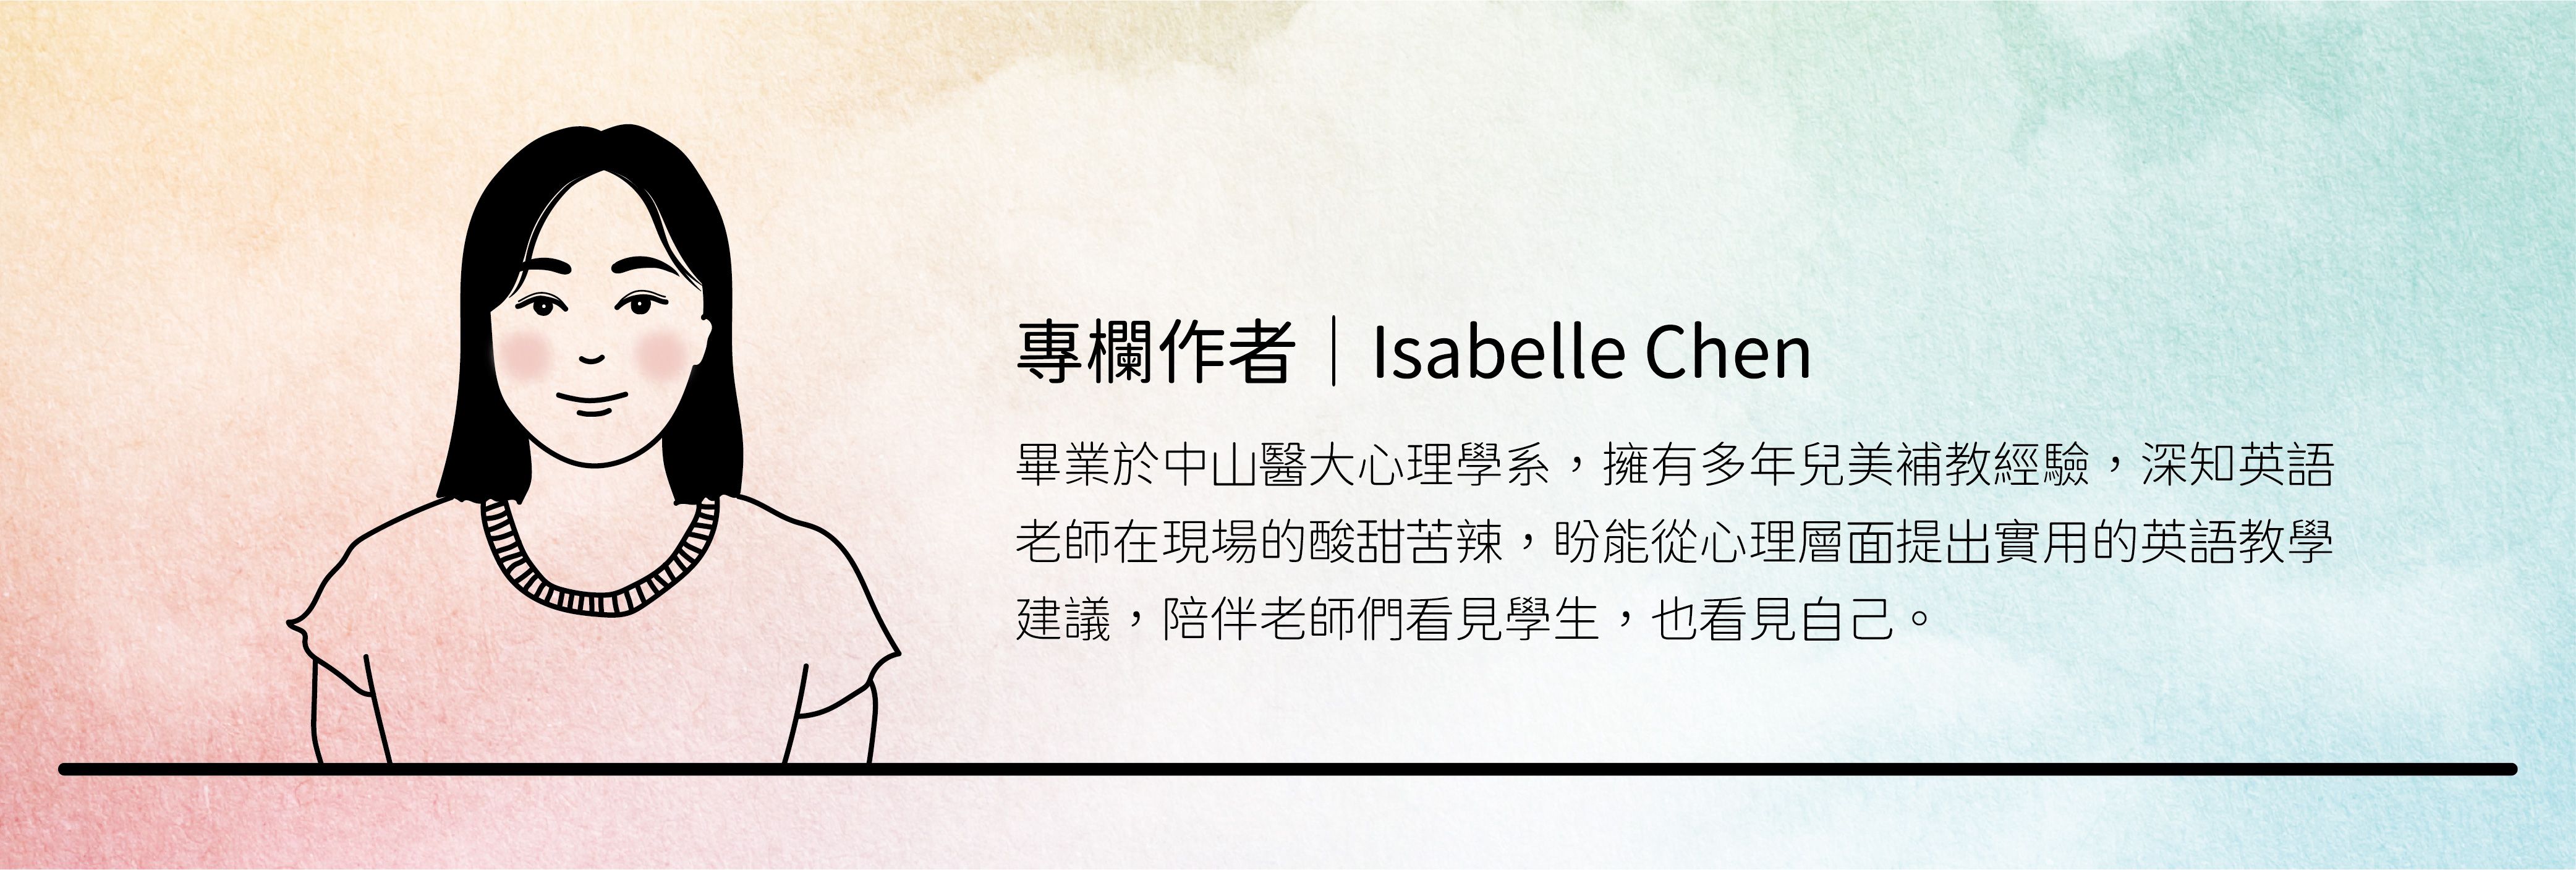 profile_isabelle